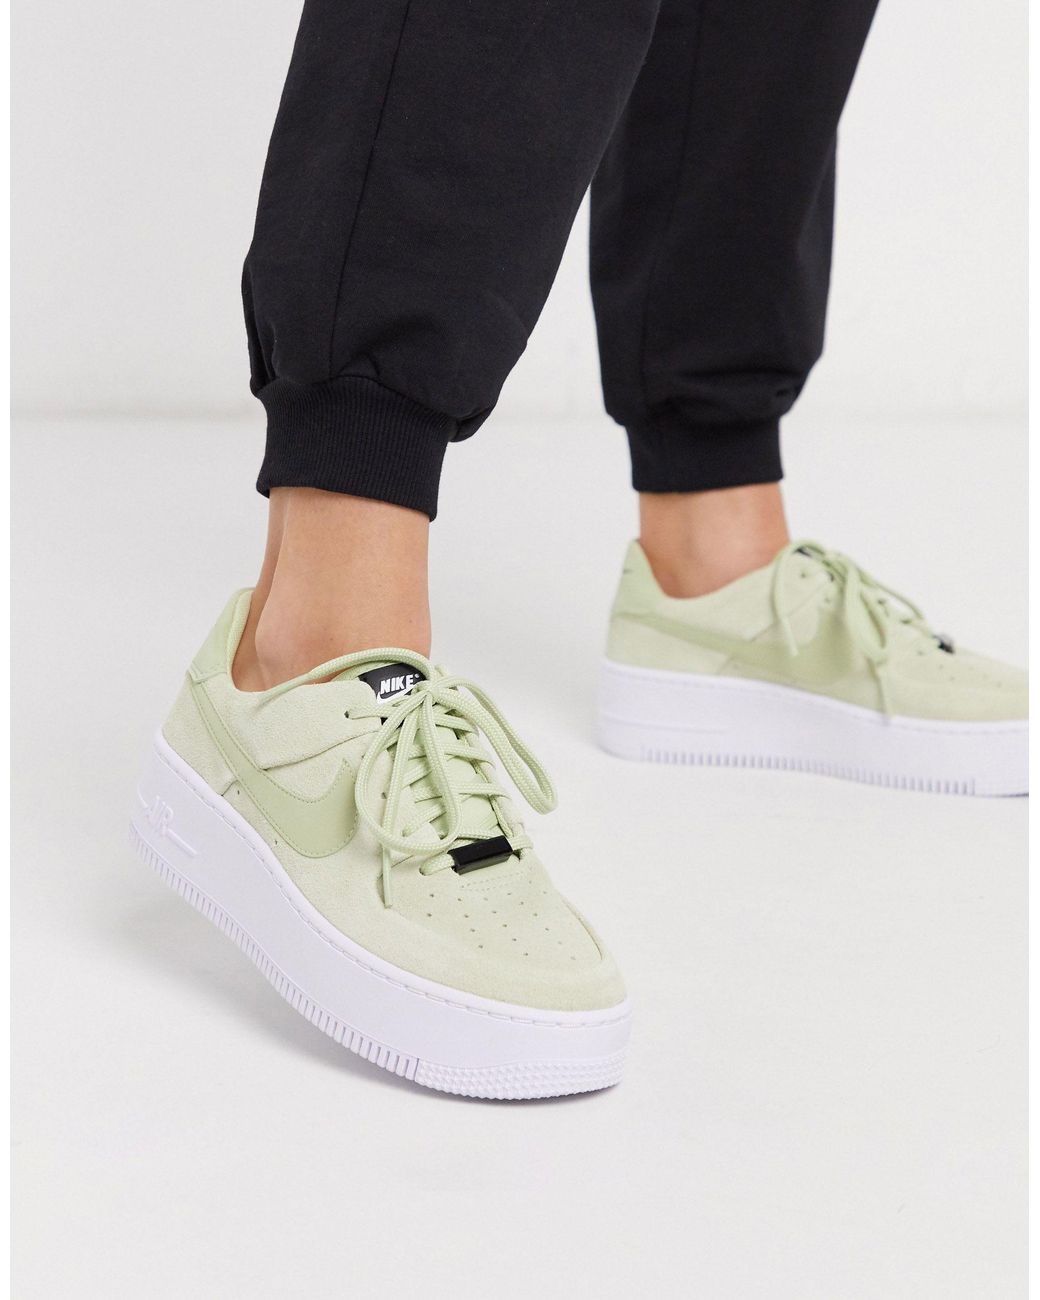 Nike Air Force 1 Sage Suede Trainers in Green | Lyst Australia